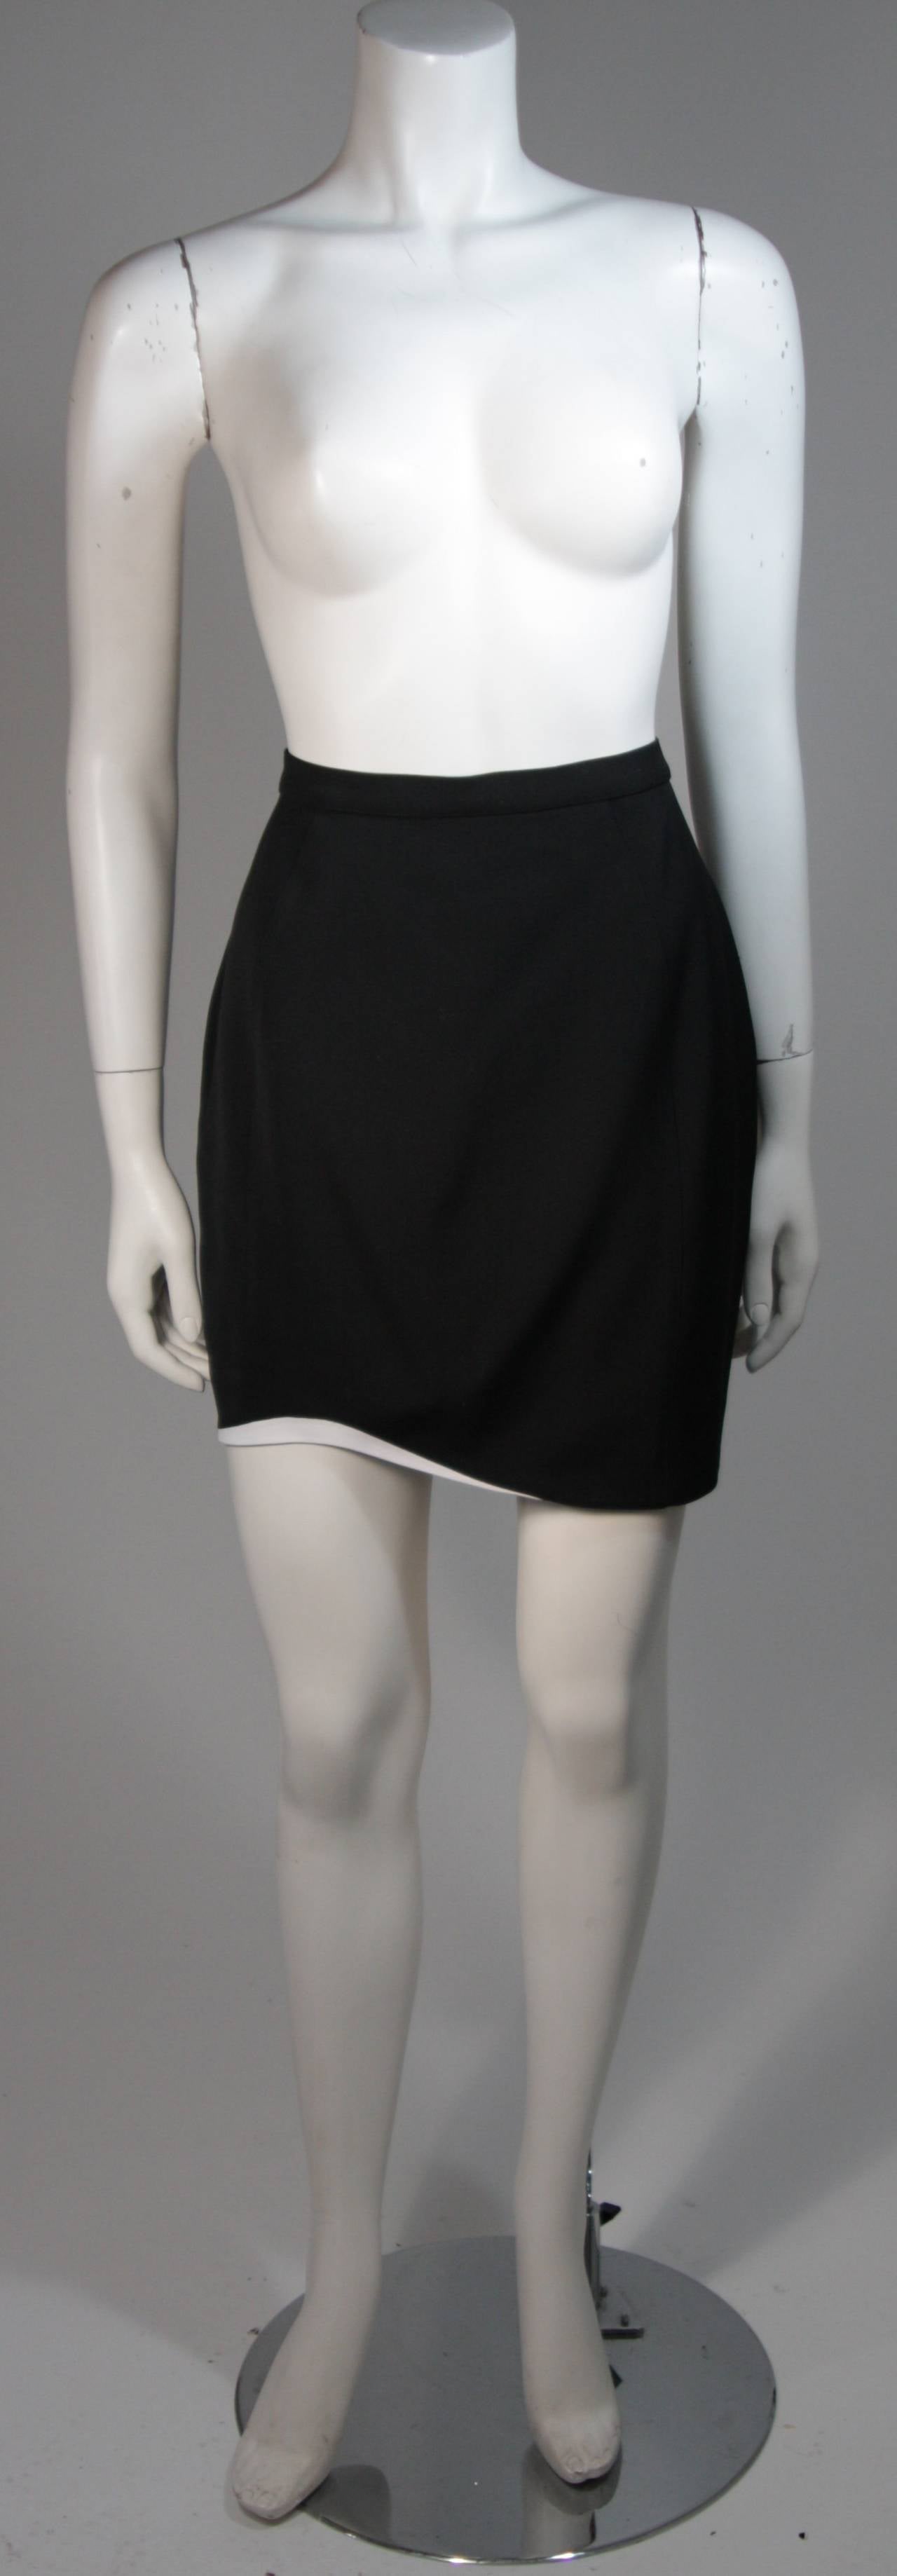 Thierry Mugler Black & White Skirt Suit w.Three Dimensional Lapel & Cuff detail For Sale 2